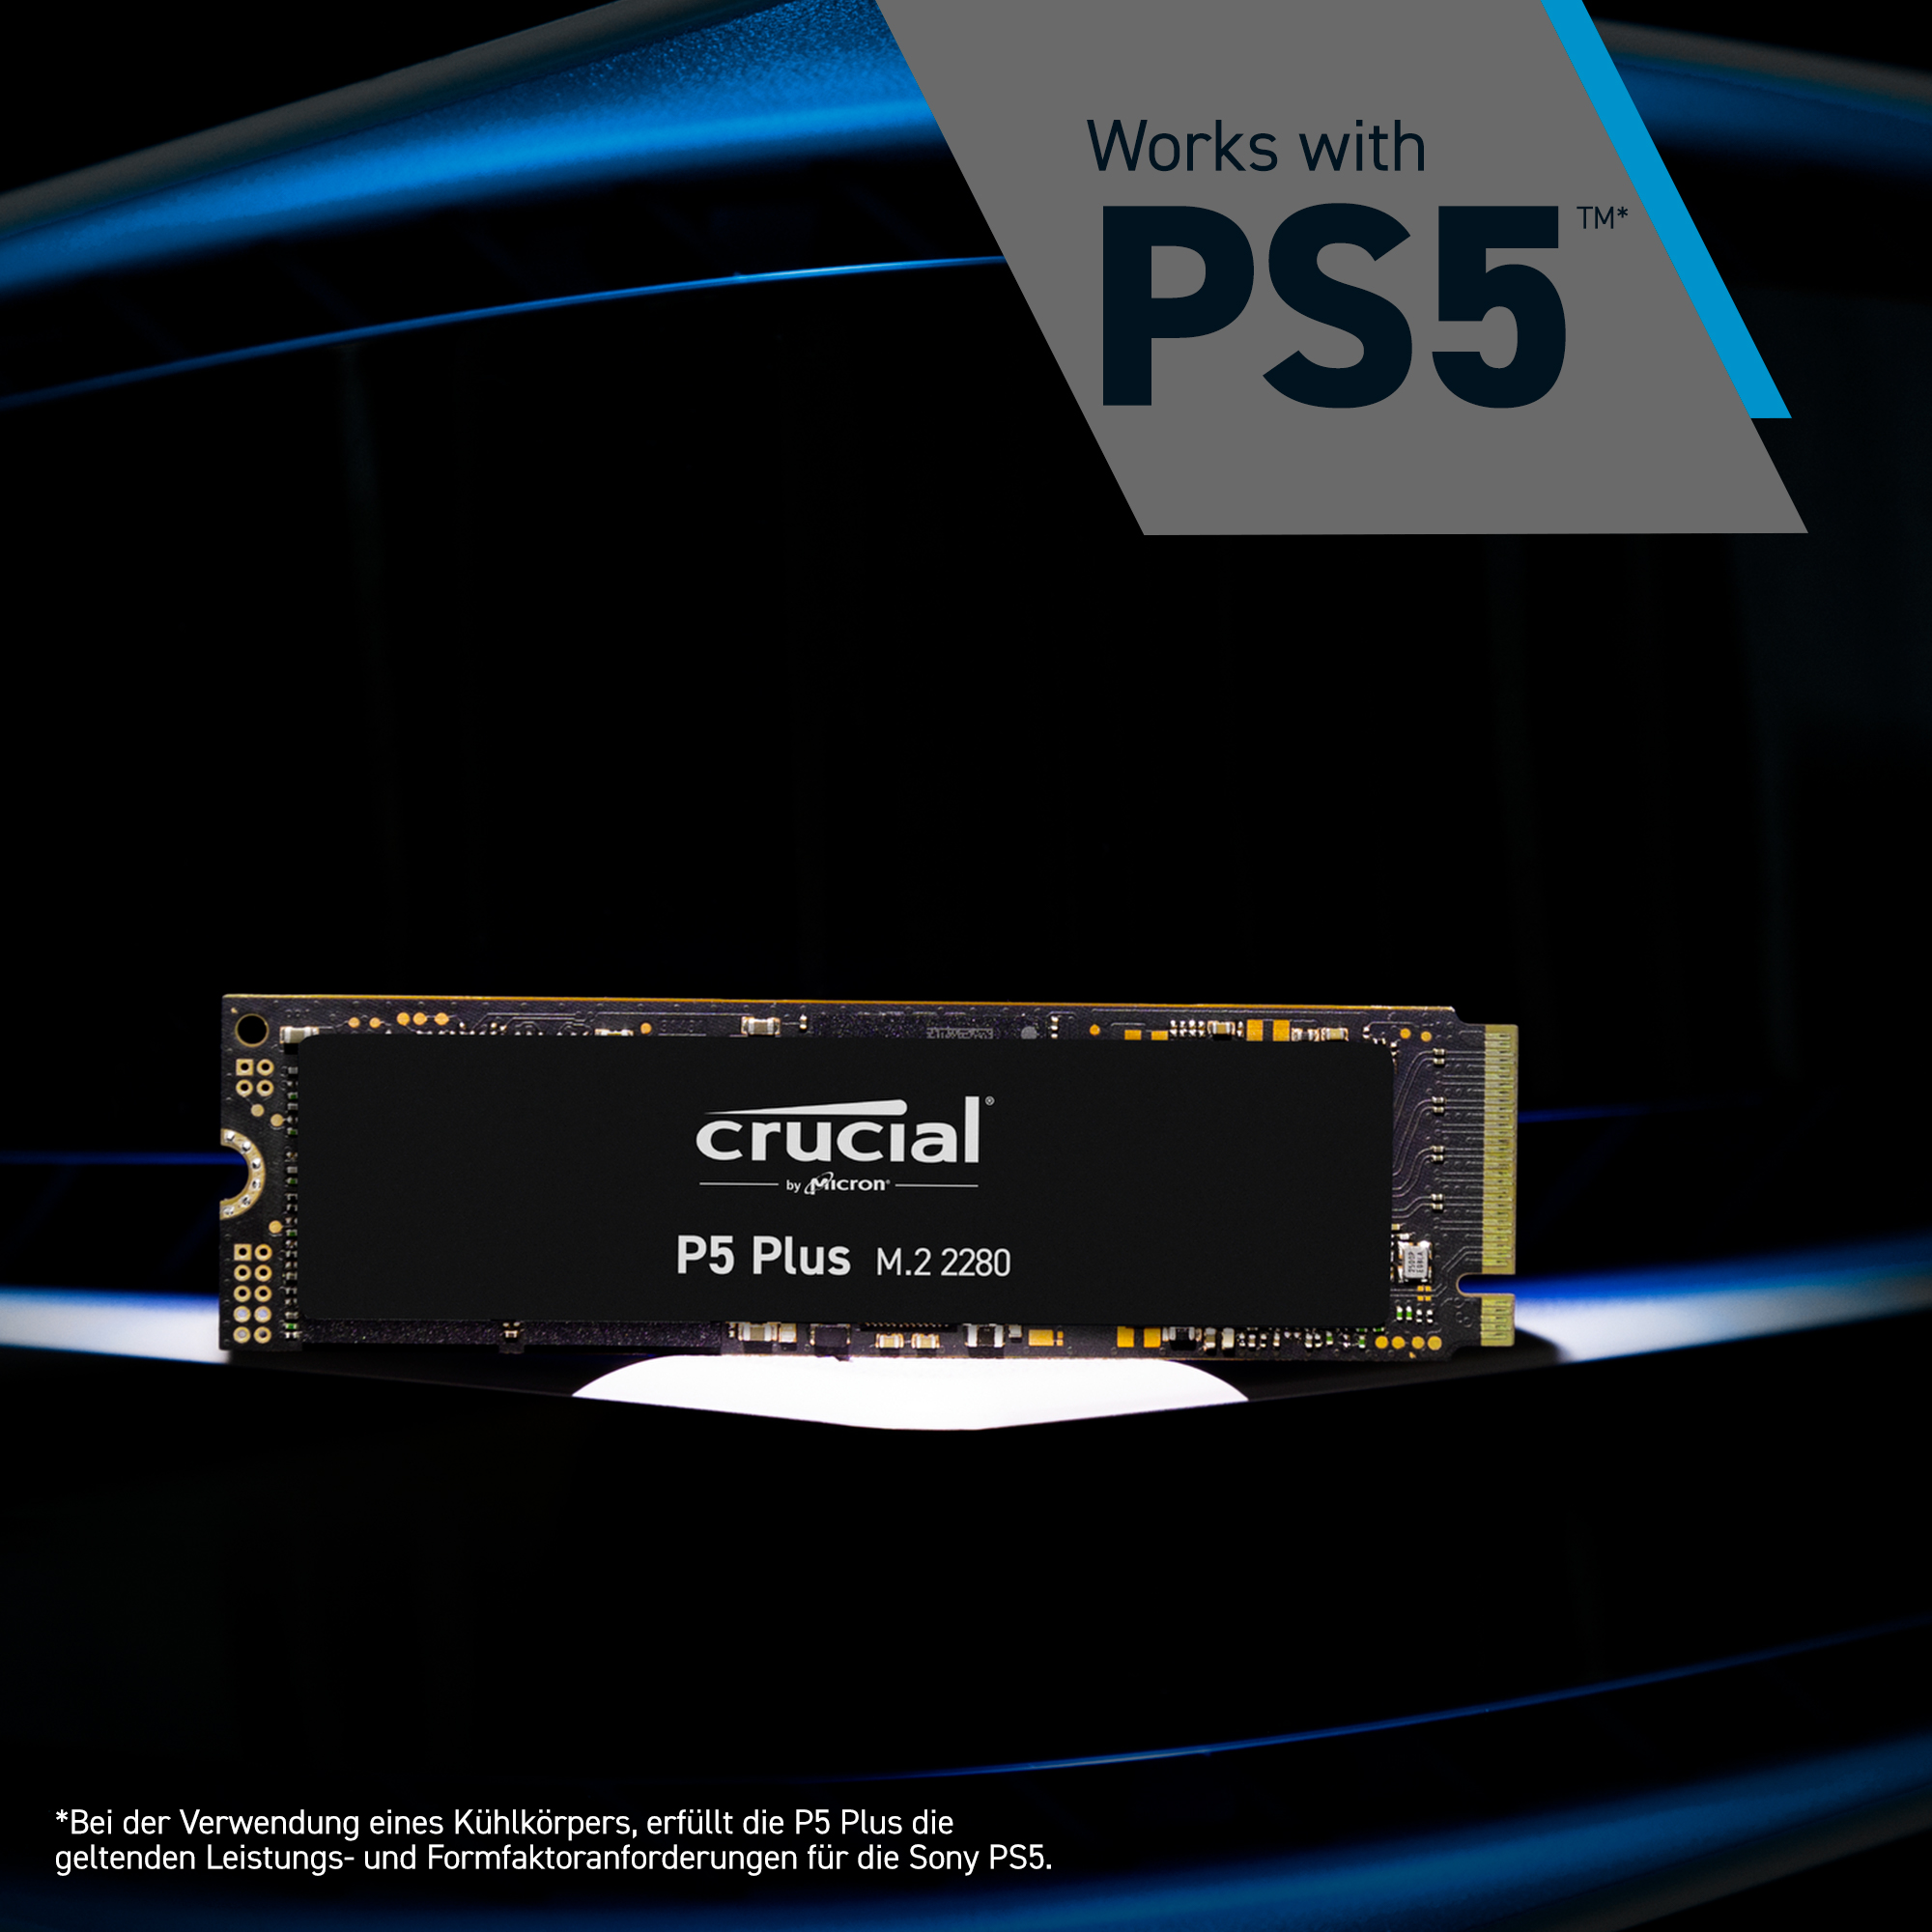 Crucial P5 Plus works with PS5